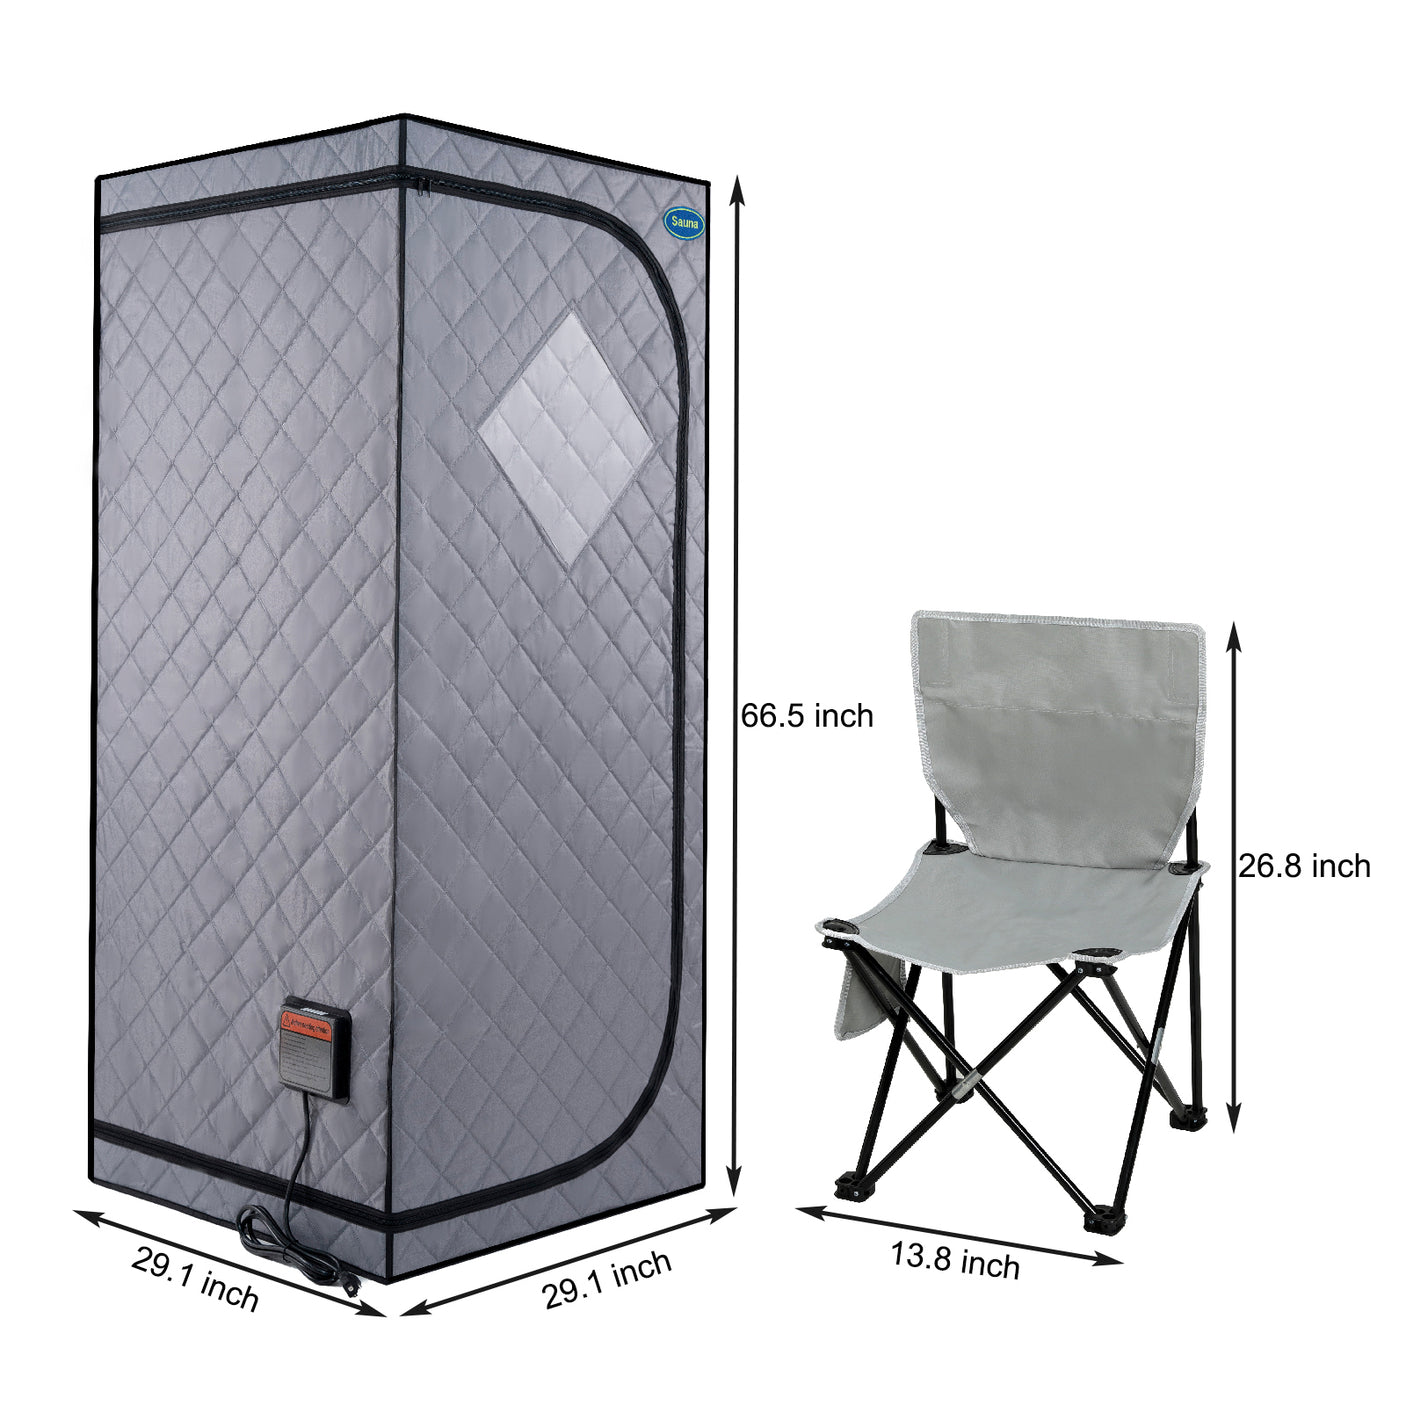 Portable Full Size Grey Infrared Sauna tent–Personal Home Spa, with Infrared Panels, Heating Foot Pad, Controller, Foldable Chair ,Reading light. Easy to Install. Fast heating, with FCC Certification - Home Elegance USA